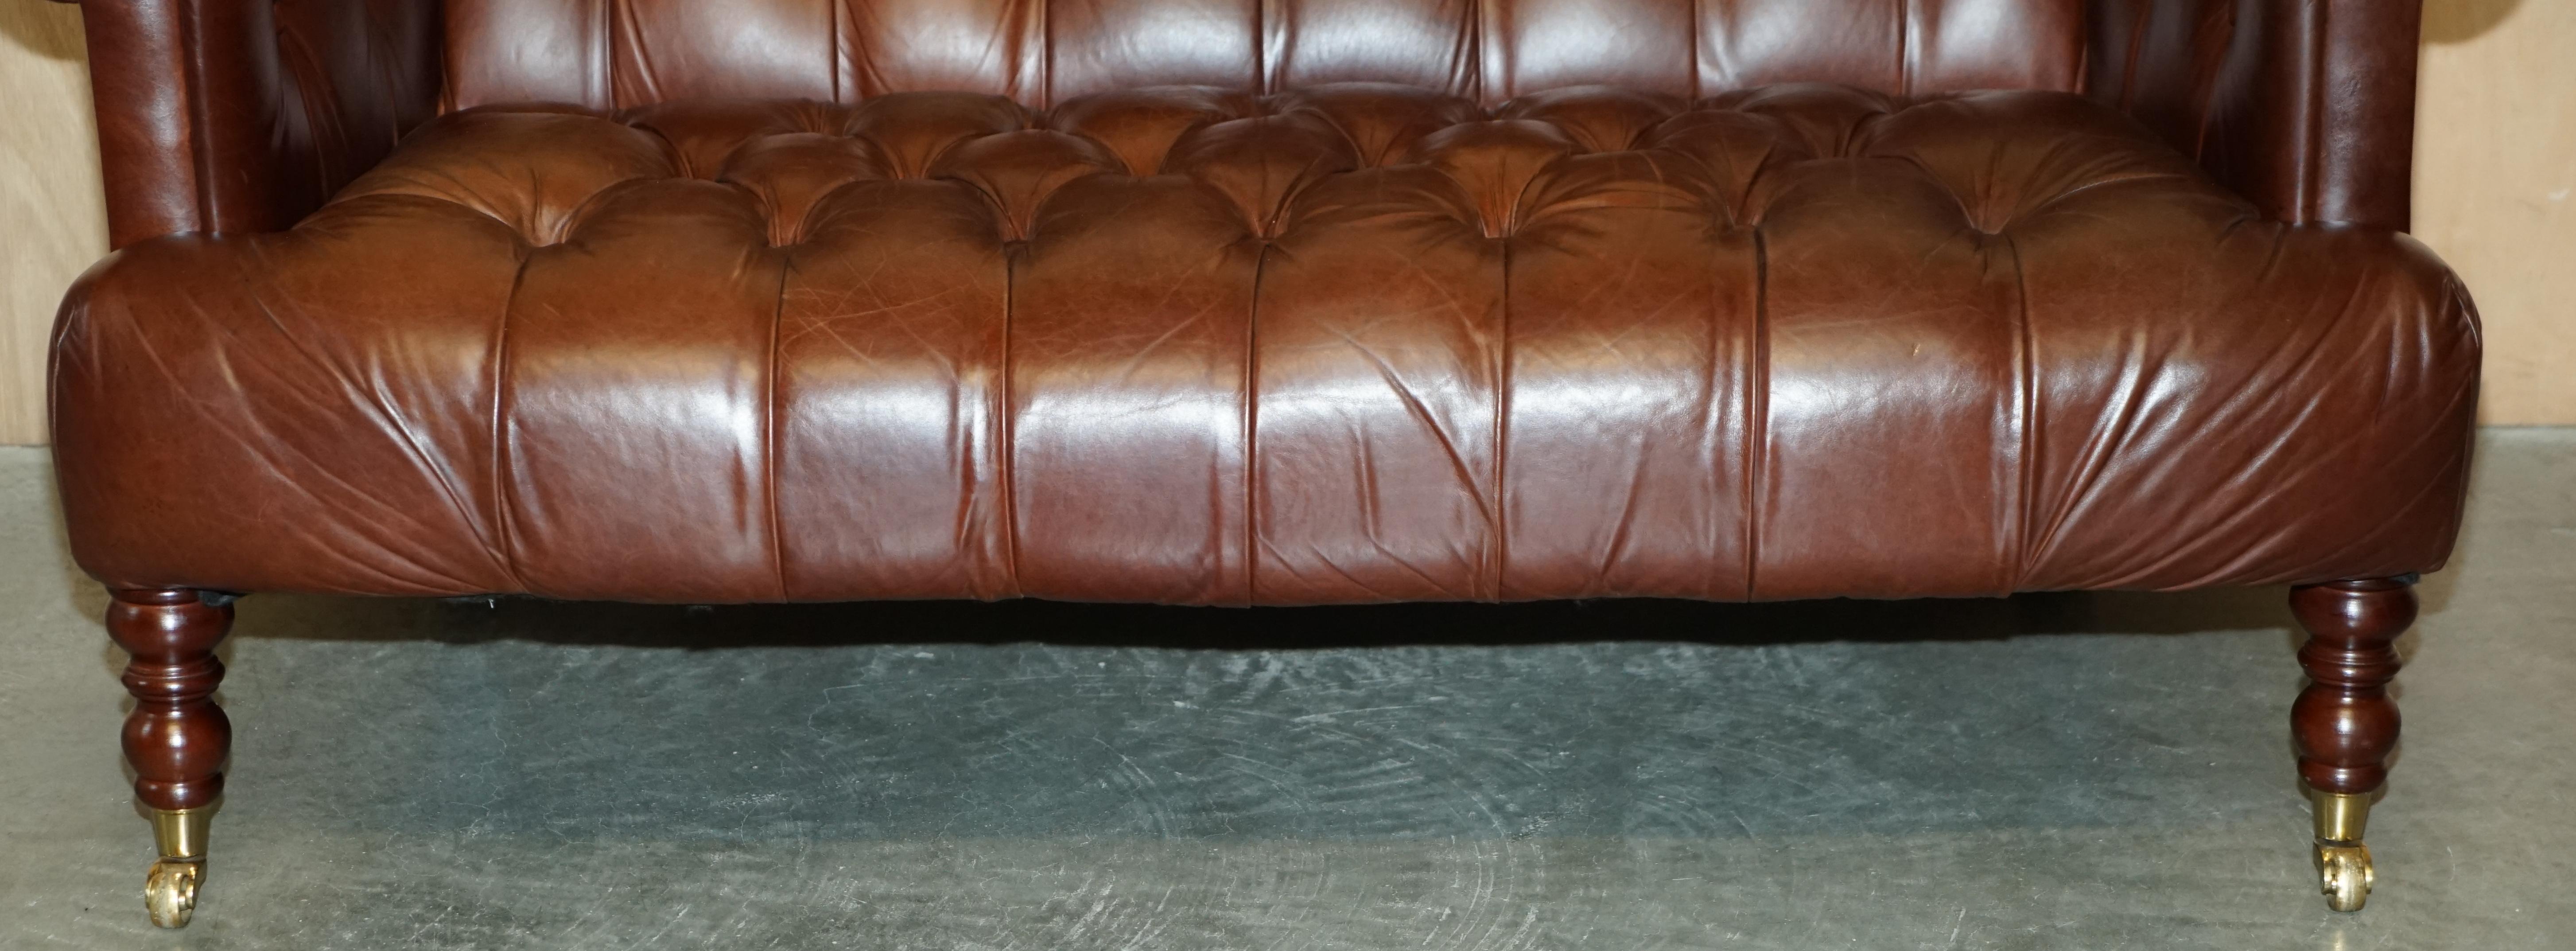 Leather FiNE CHESTNUT BROWN LEATHER LAUREN ASHLEY CHESTERFIELD TWO SEAT LIBRARY SOFa For Sale